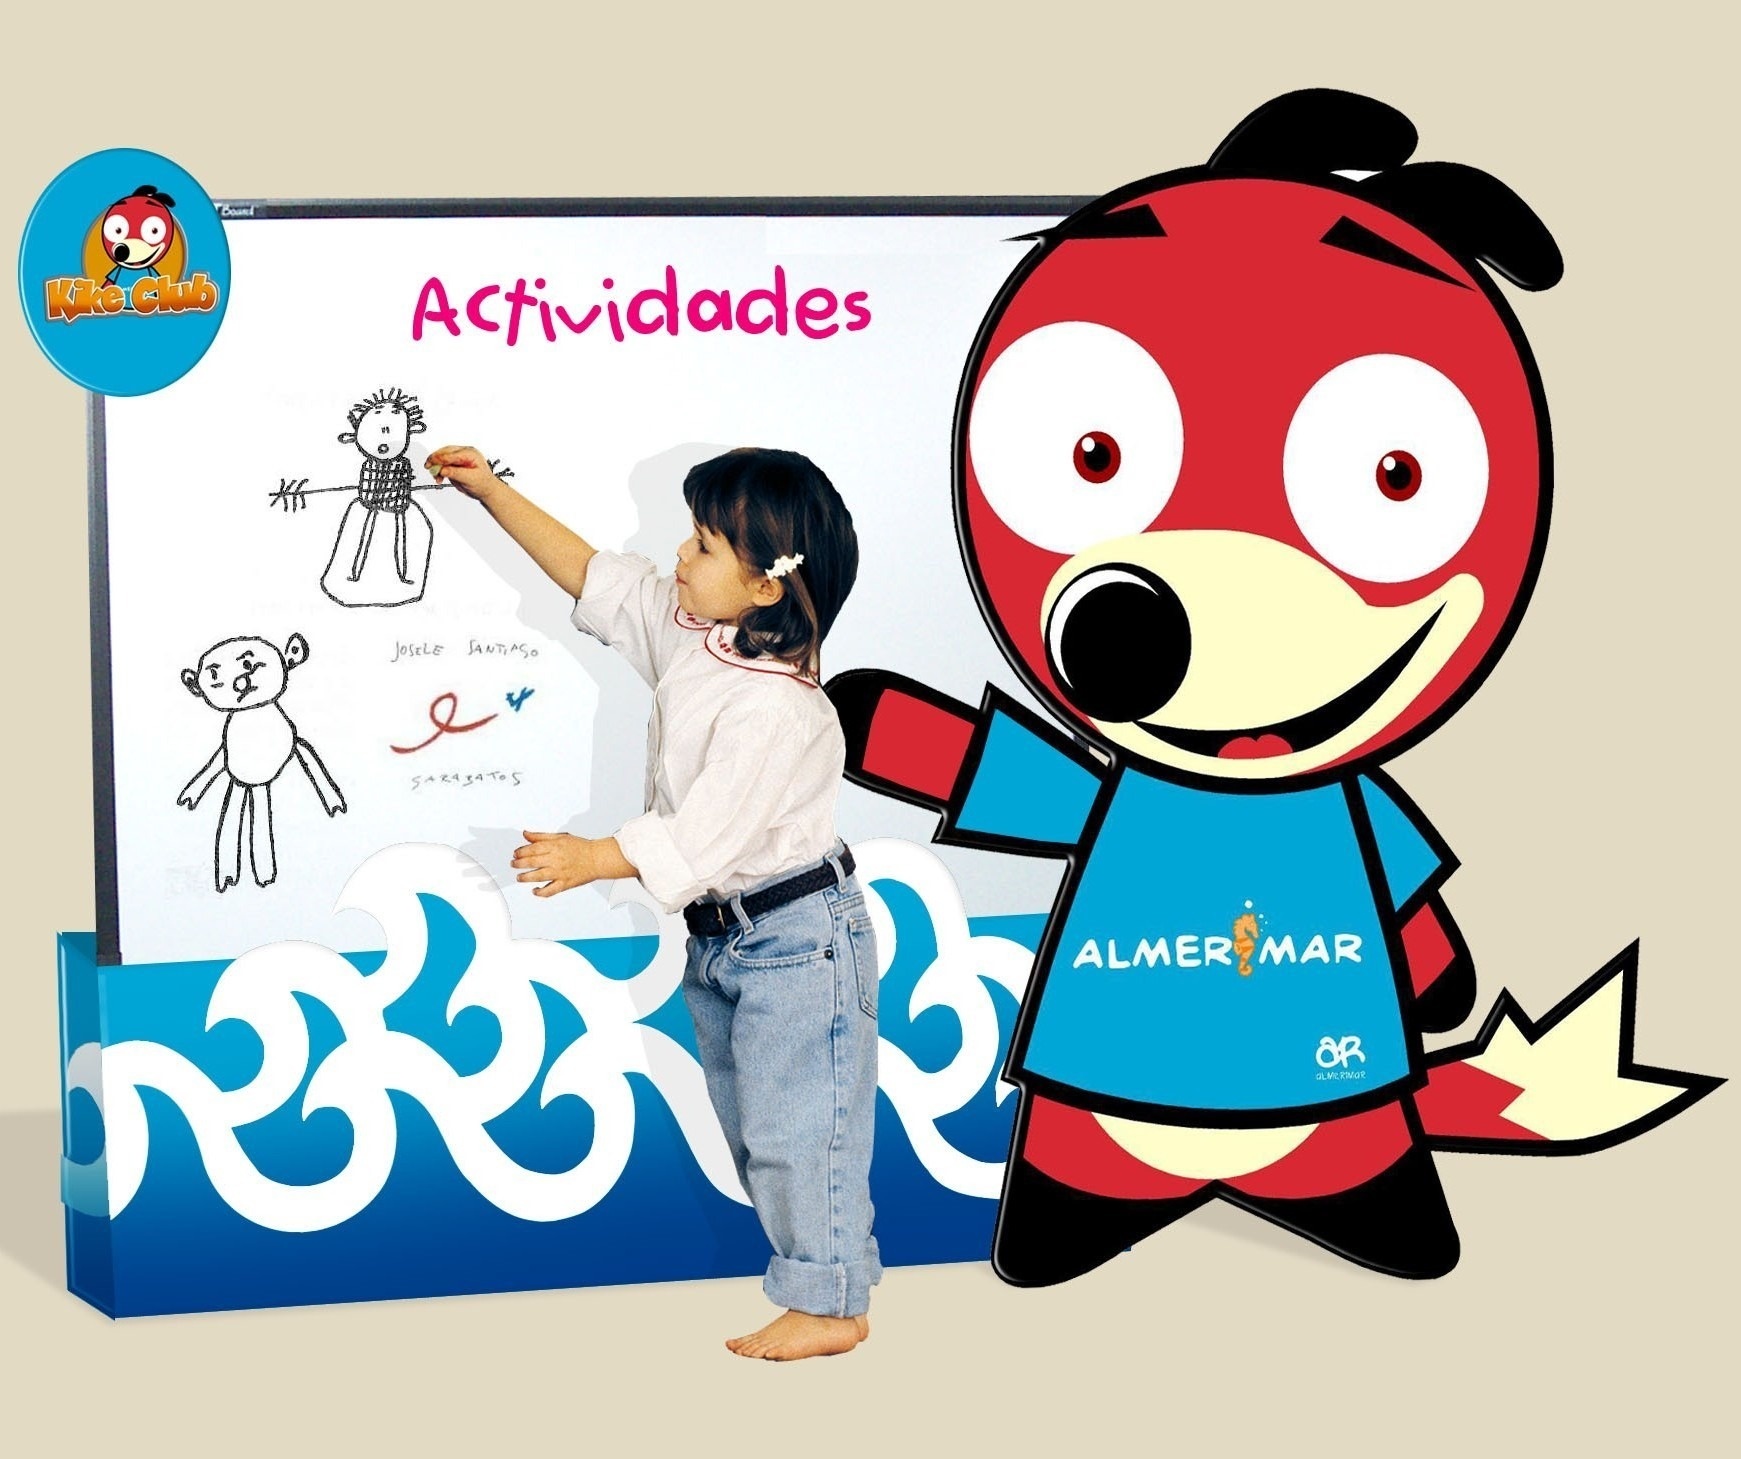 a little girl draws on a white board with the word actividades on it